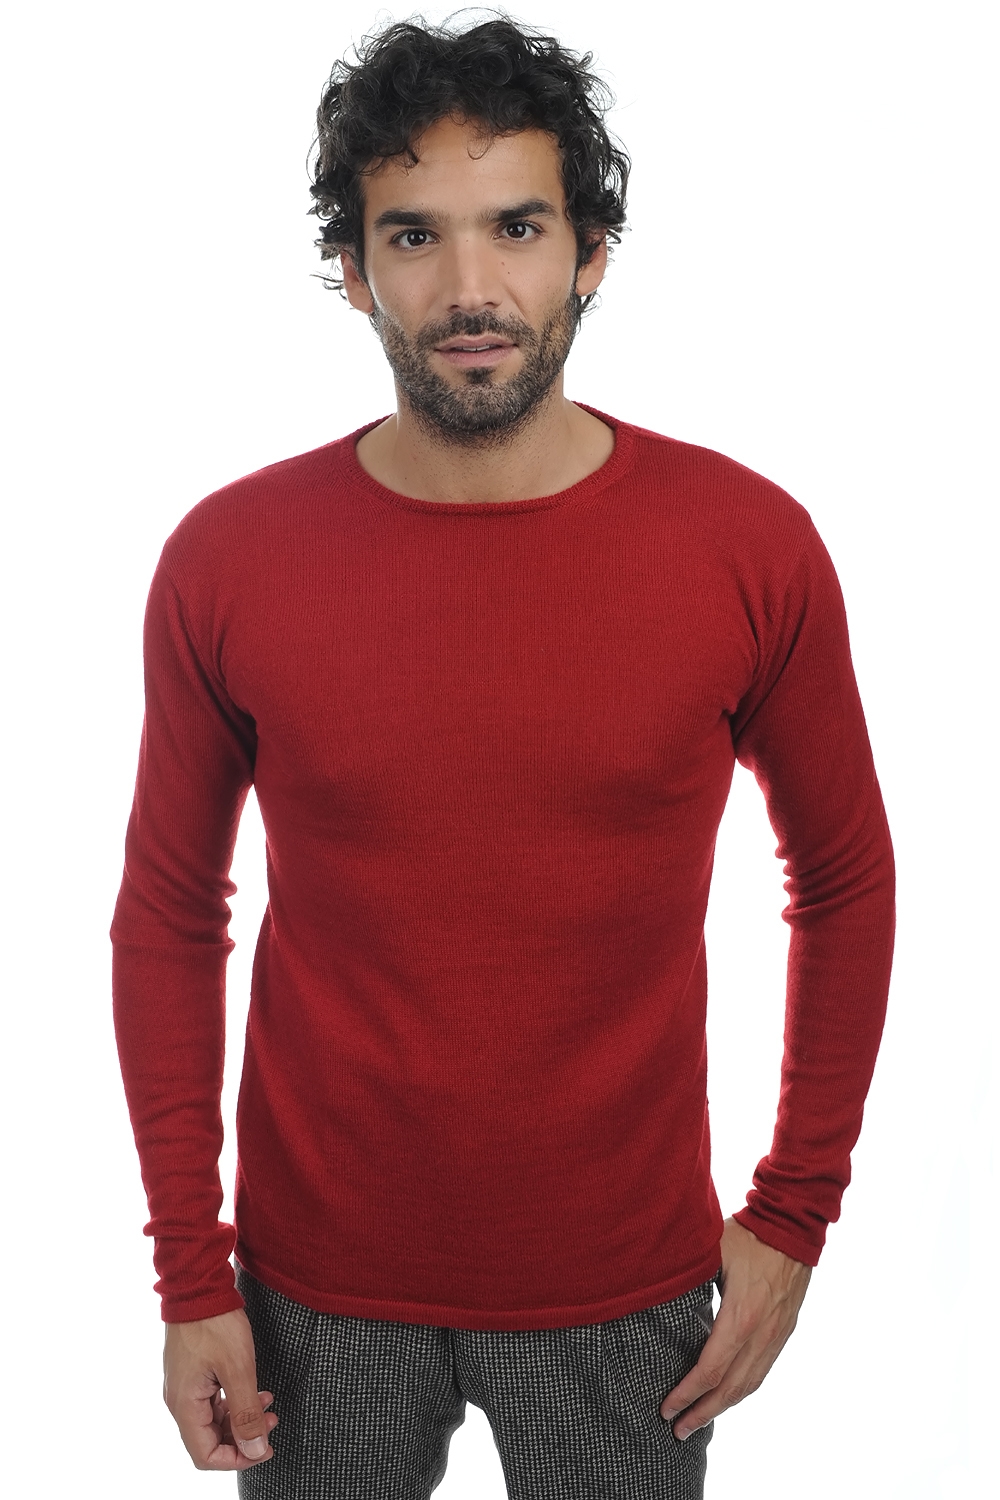 Baby Alpaga pull homme christian rouge s